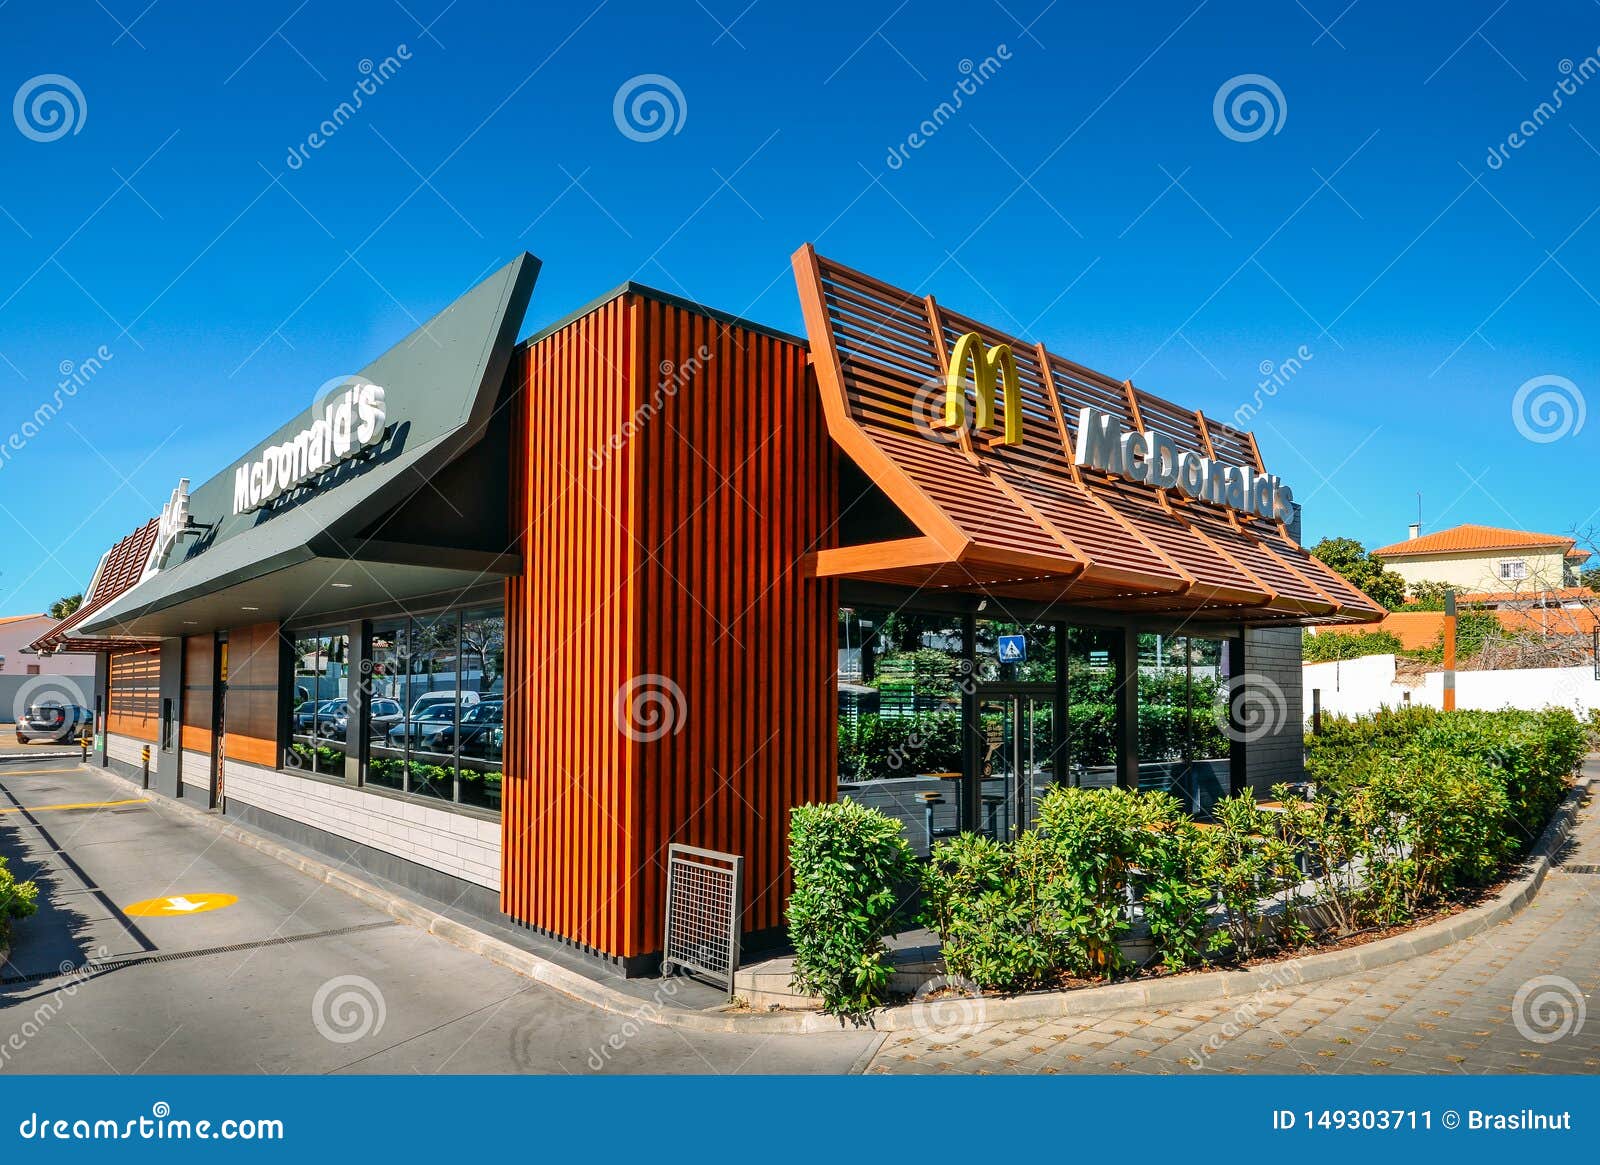  Outside  View Of Facade Of Modern McDonald s Fast  food  